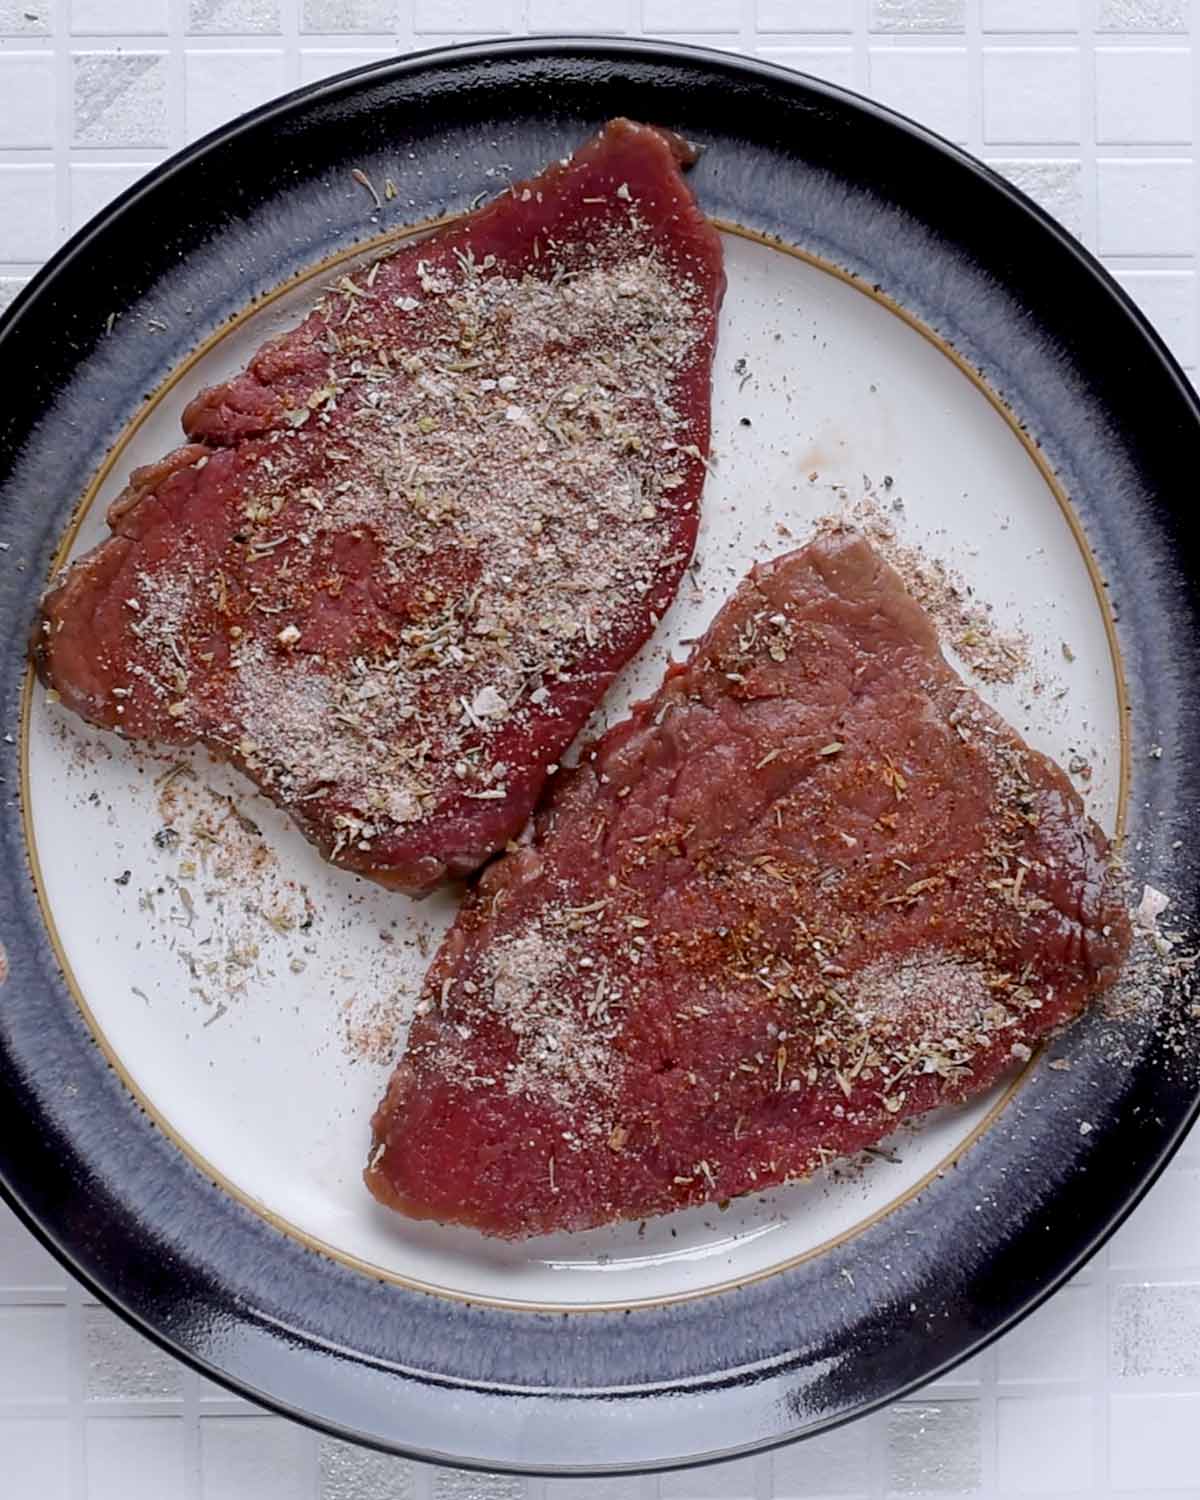 A plate with two pieces of steak, covered in seasoning.